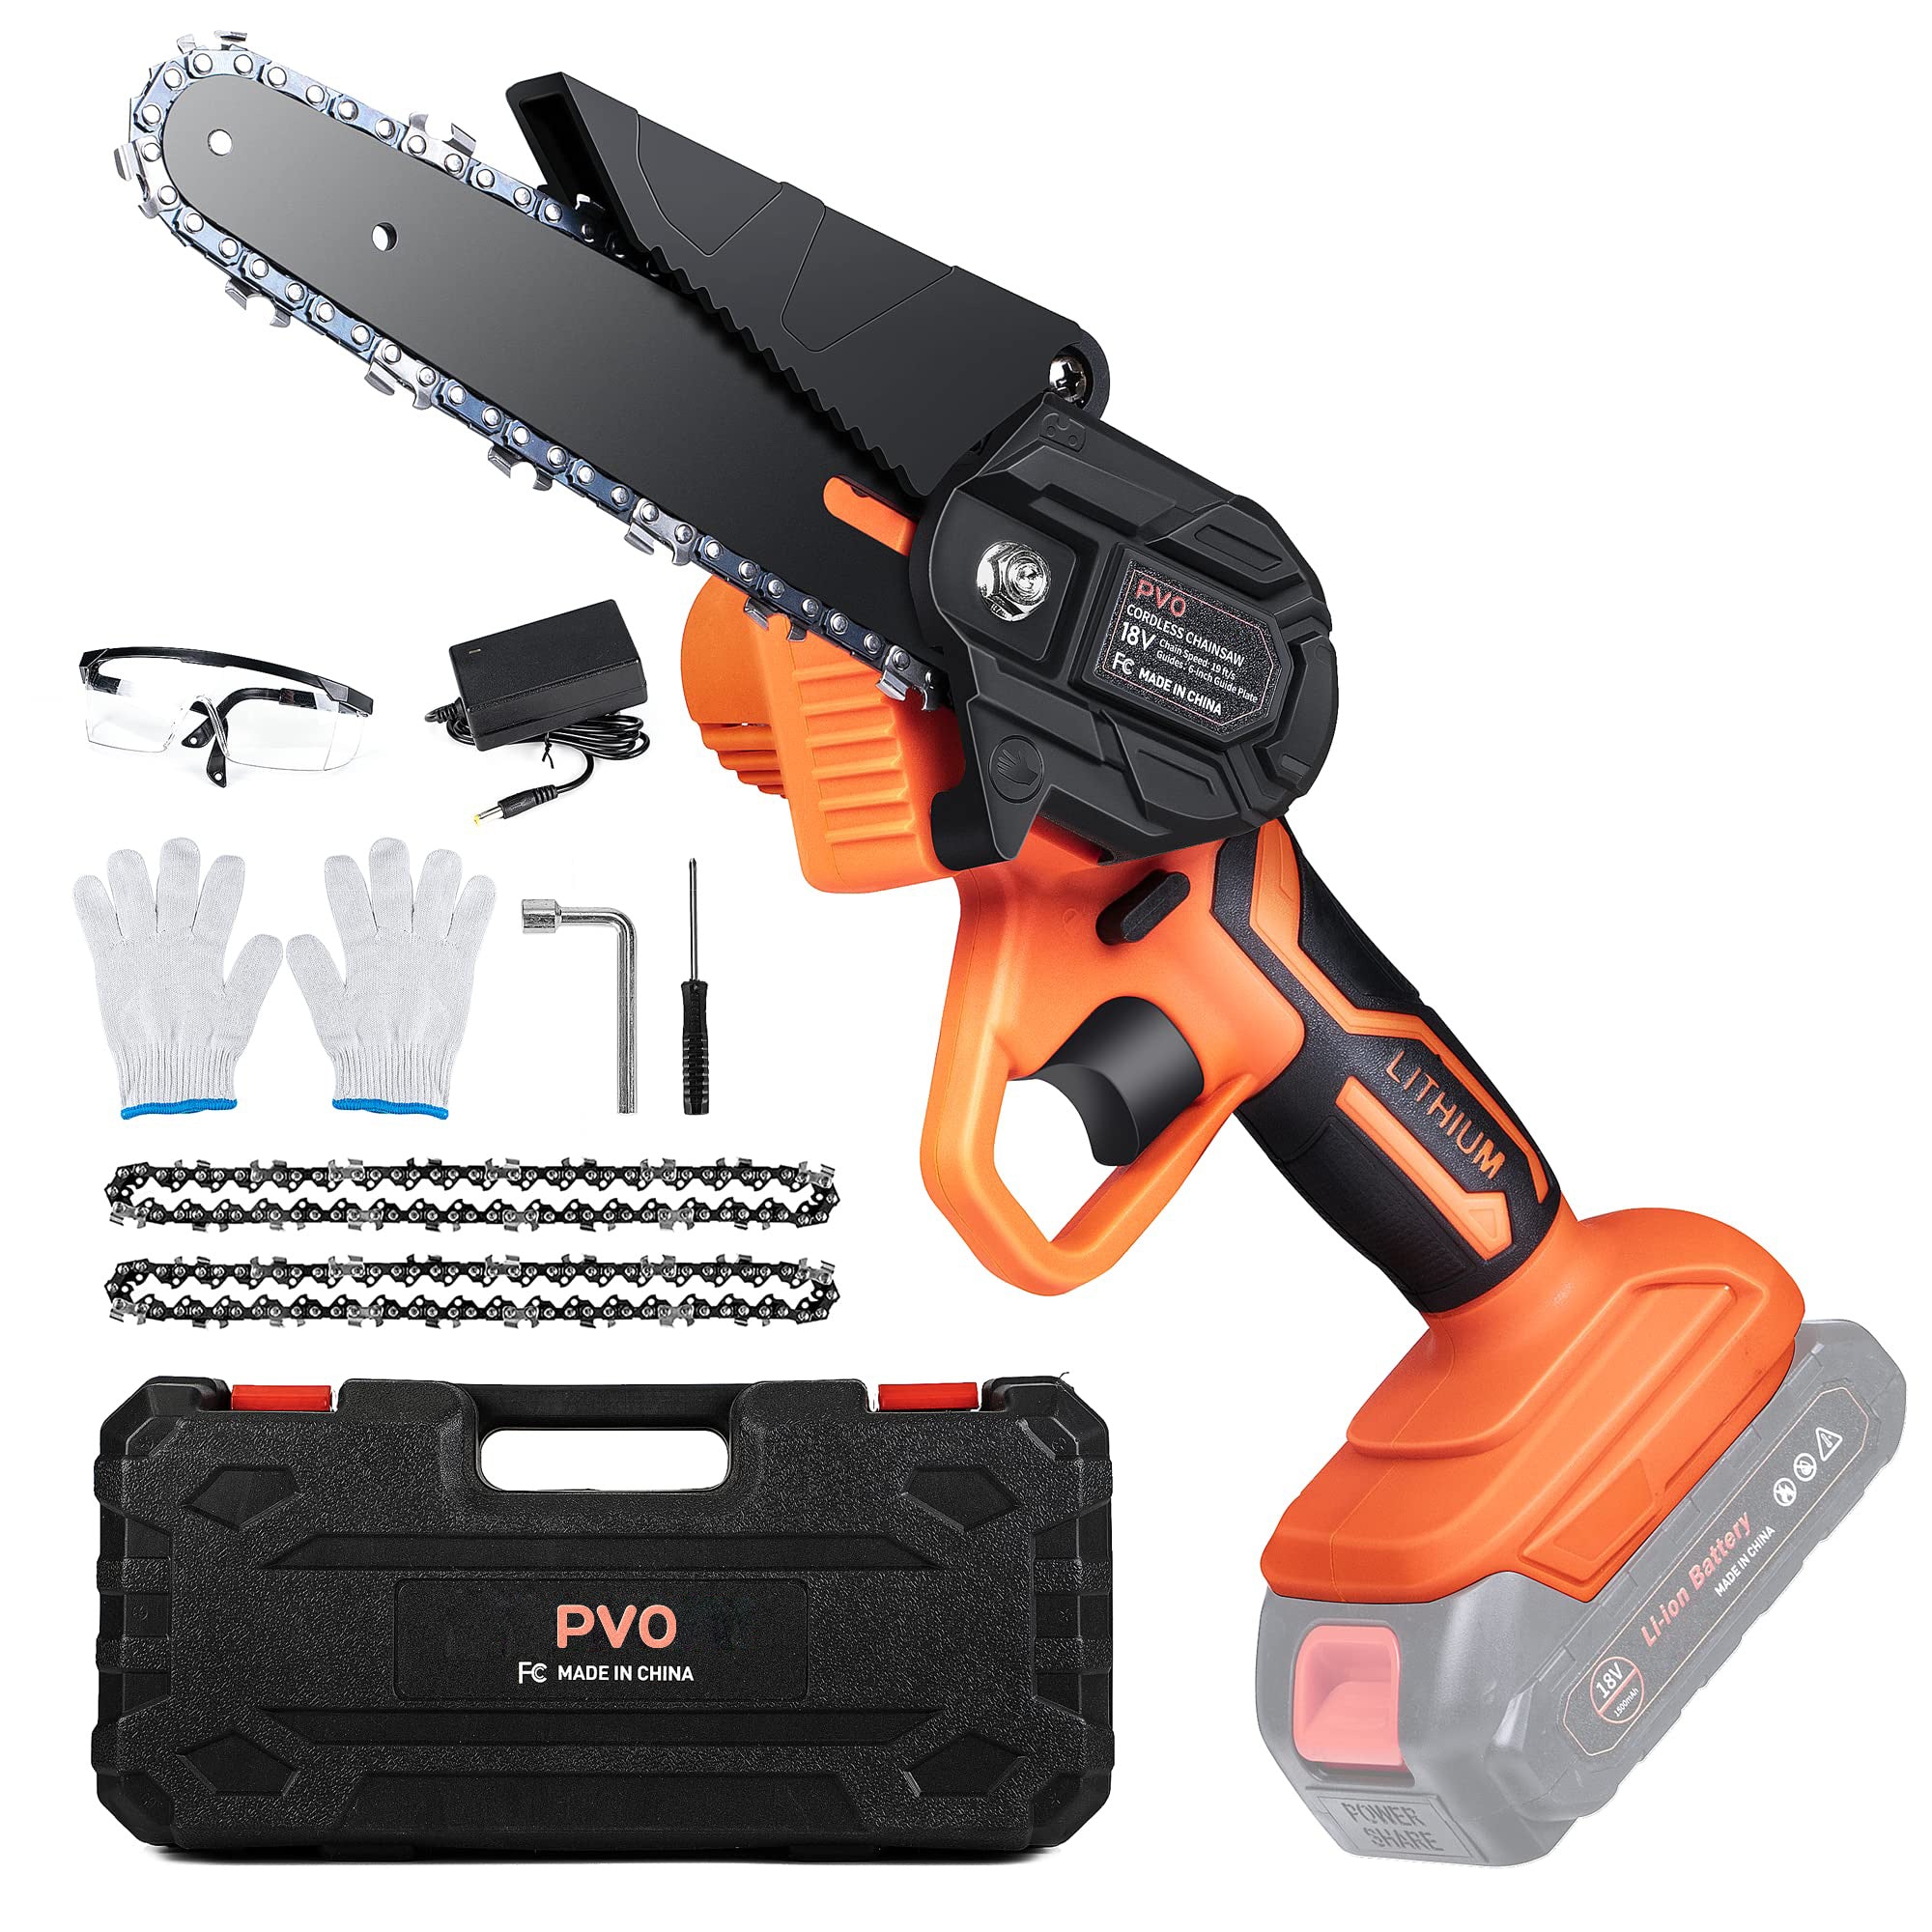 Mini Chainsaw, PVO 6 Inch Mini Chainsaw Cordless with 2 Rechargeable Battery, 1.82 LB One-Hand Power Chain Saws with Security Lock, Electric Chainsaw for Tree Trimming Branch Pruning